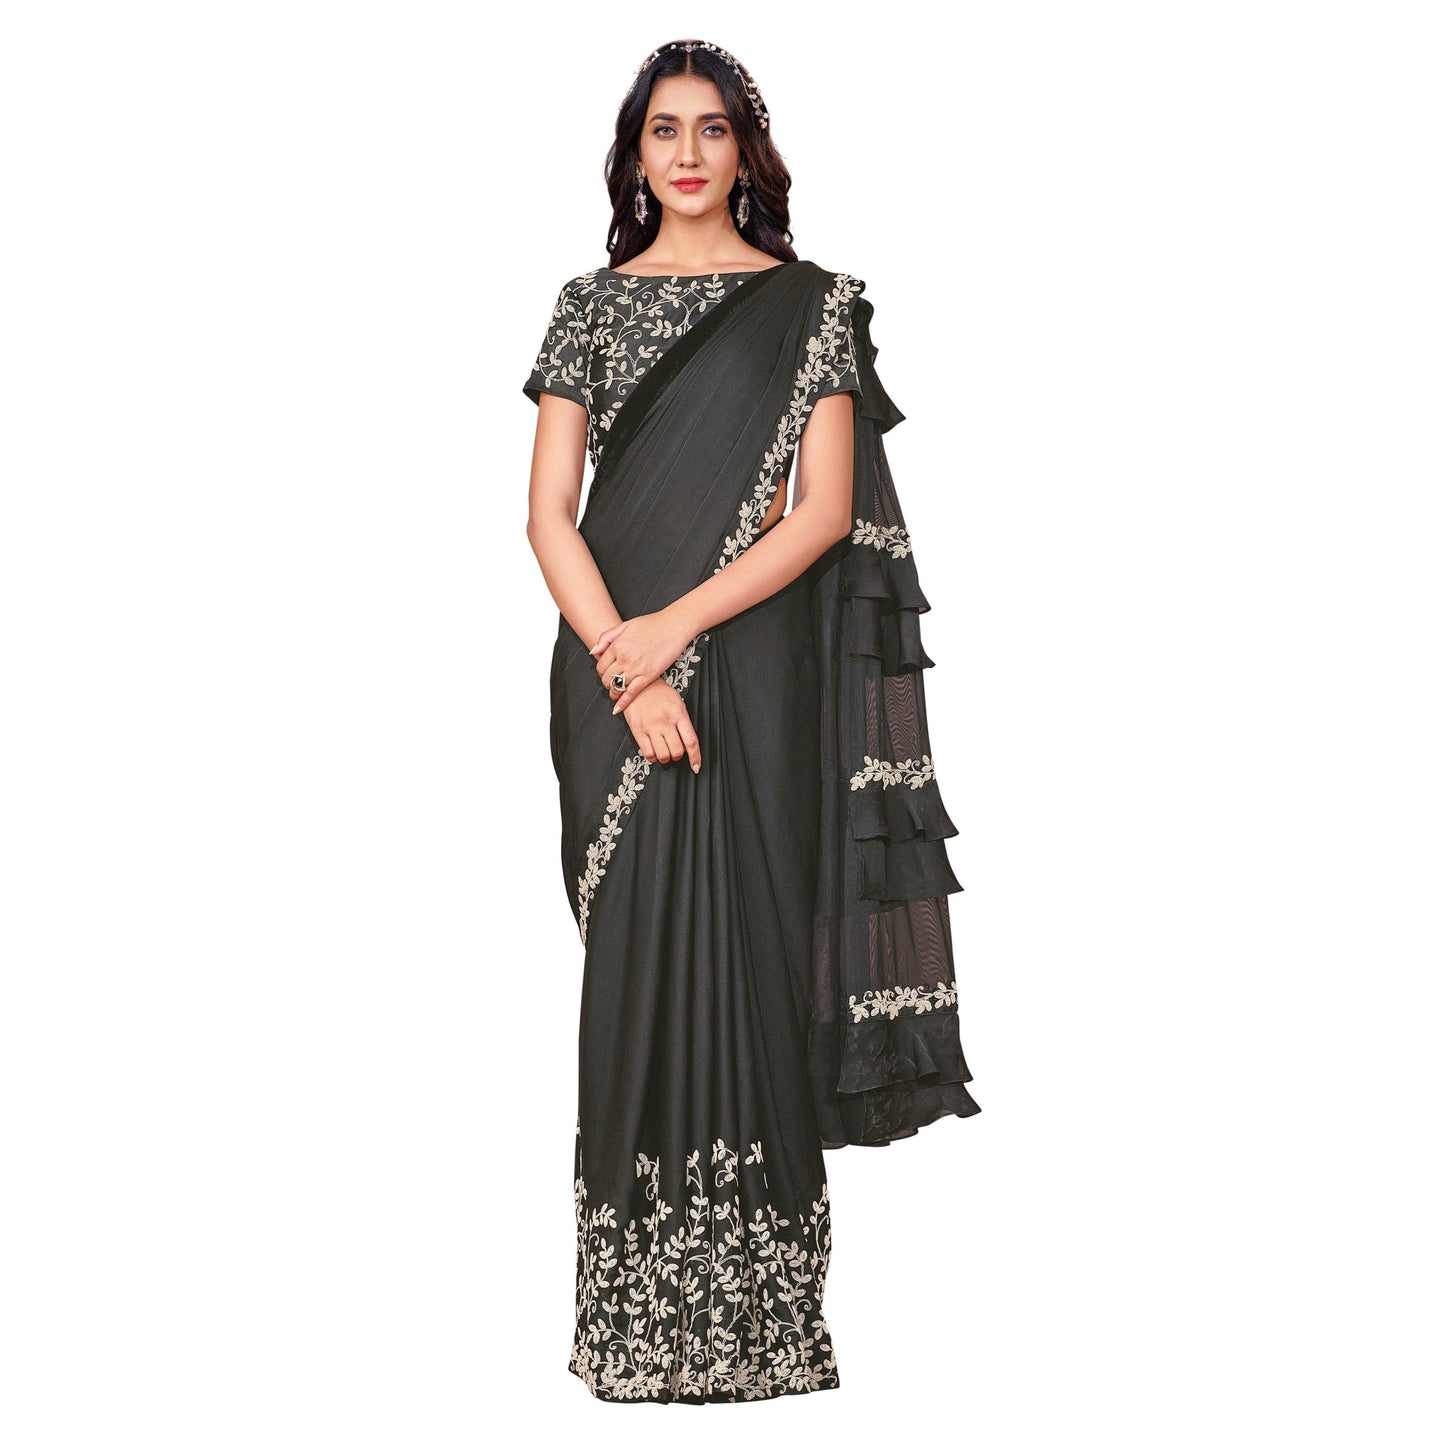 Maharani's Party Wear Stitched Designer Saree - Black (with stitched Blouse & Petticoat)